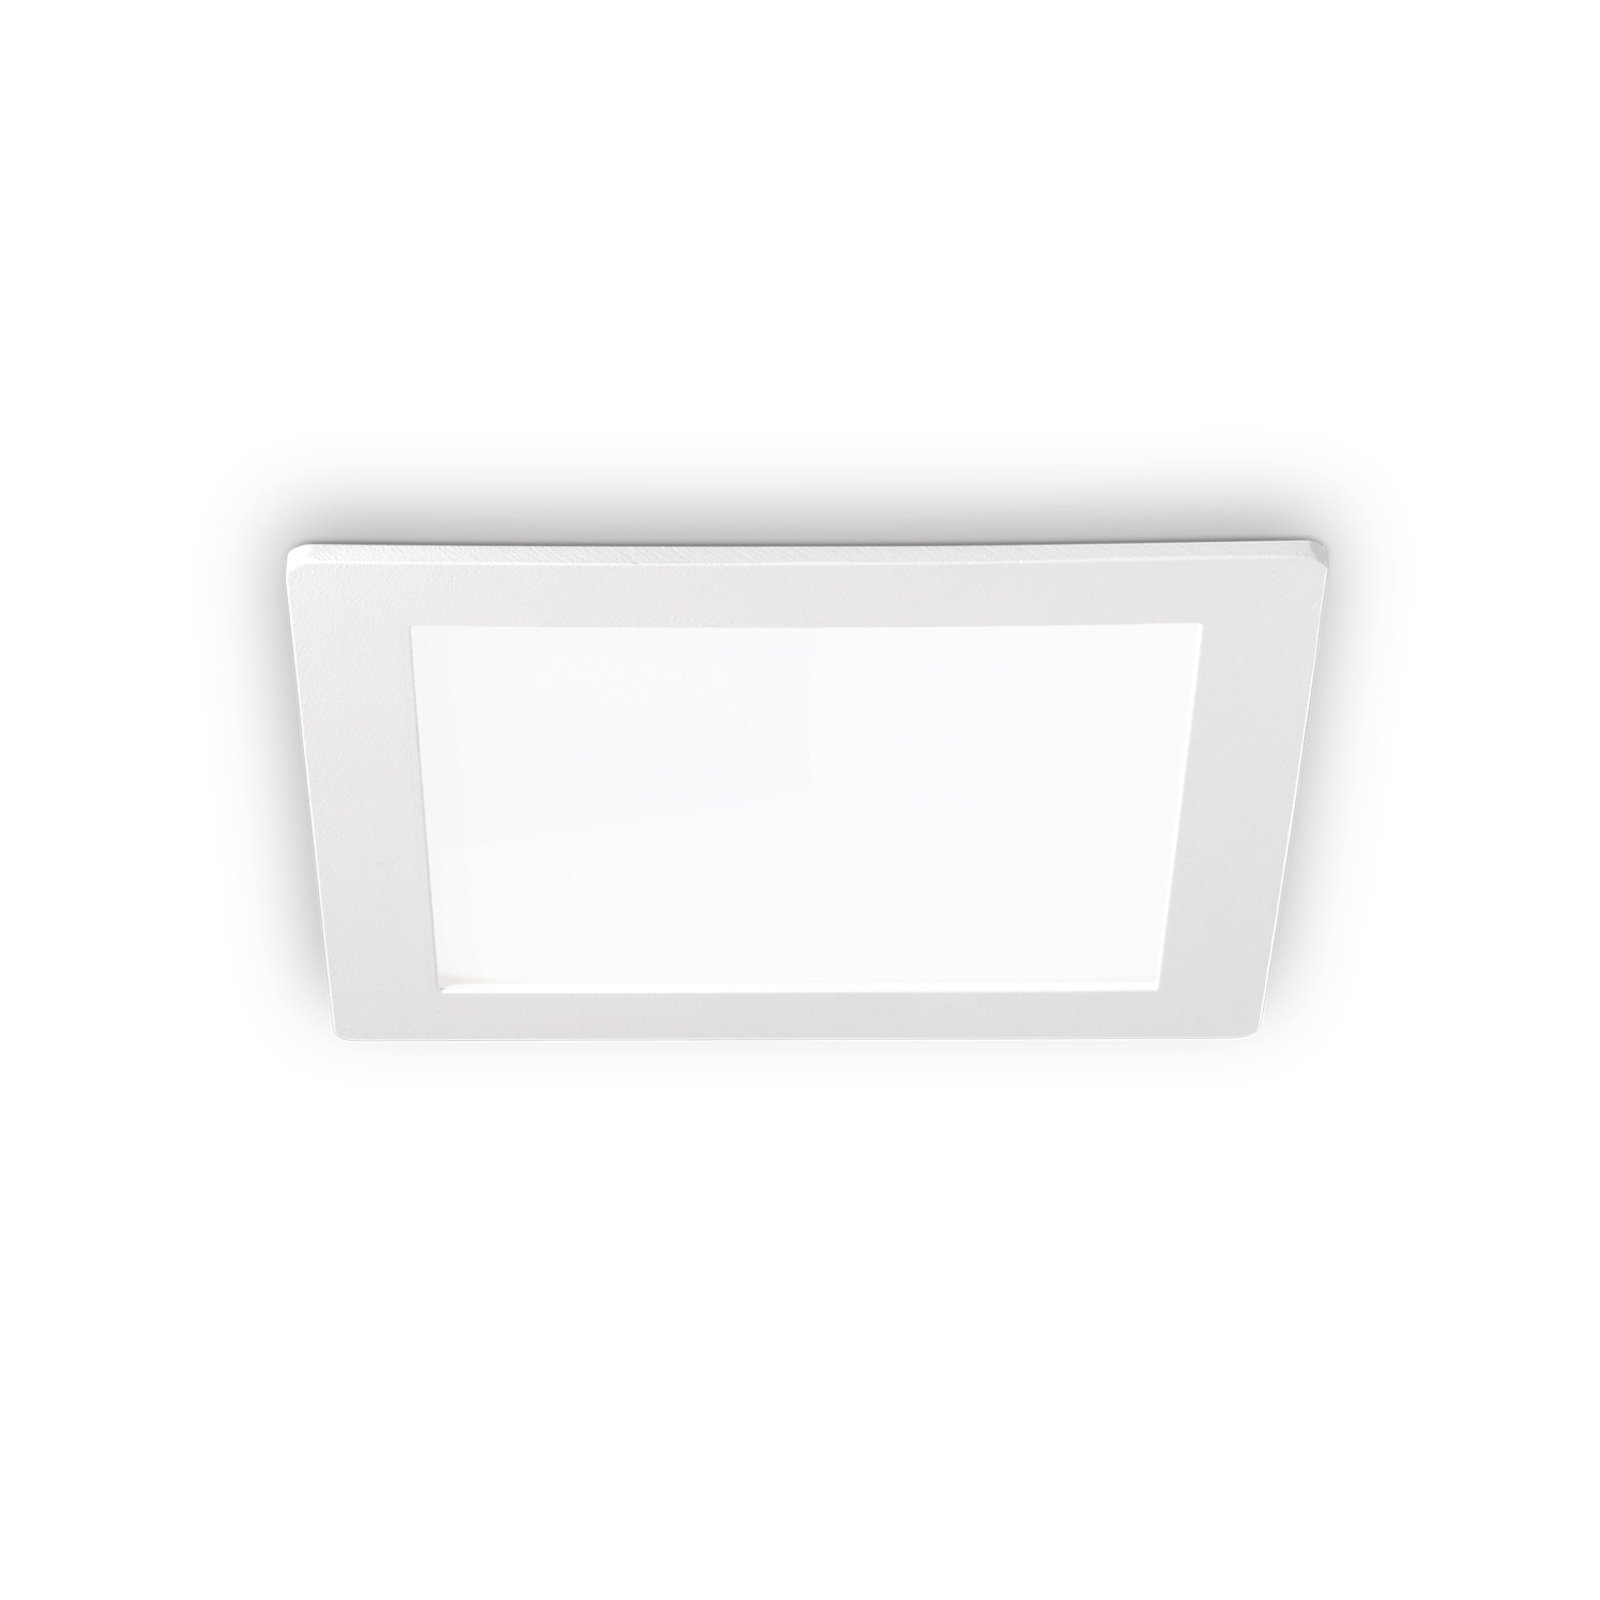 Groove square LED downlight 11.8 x 11.8 cm